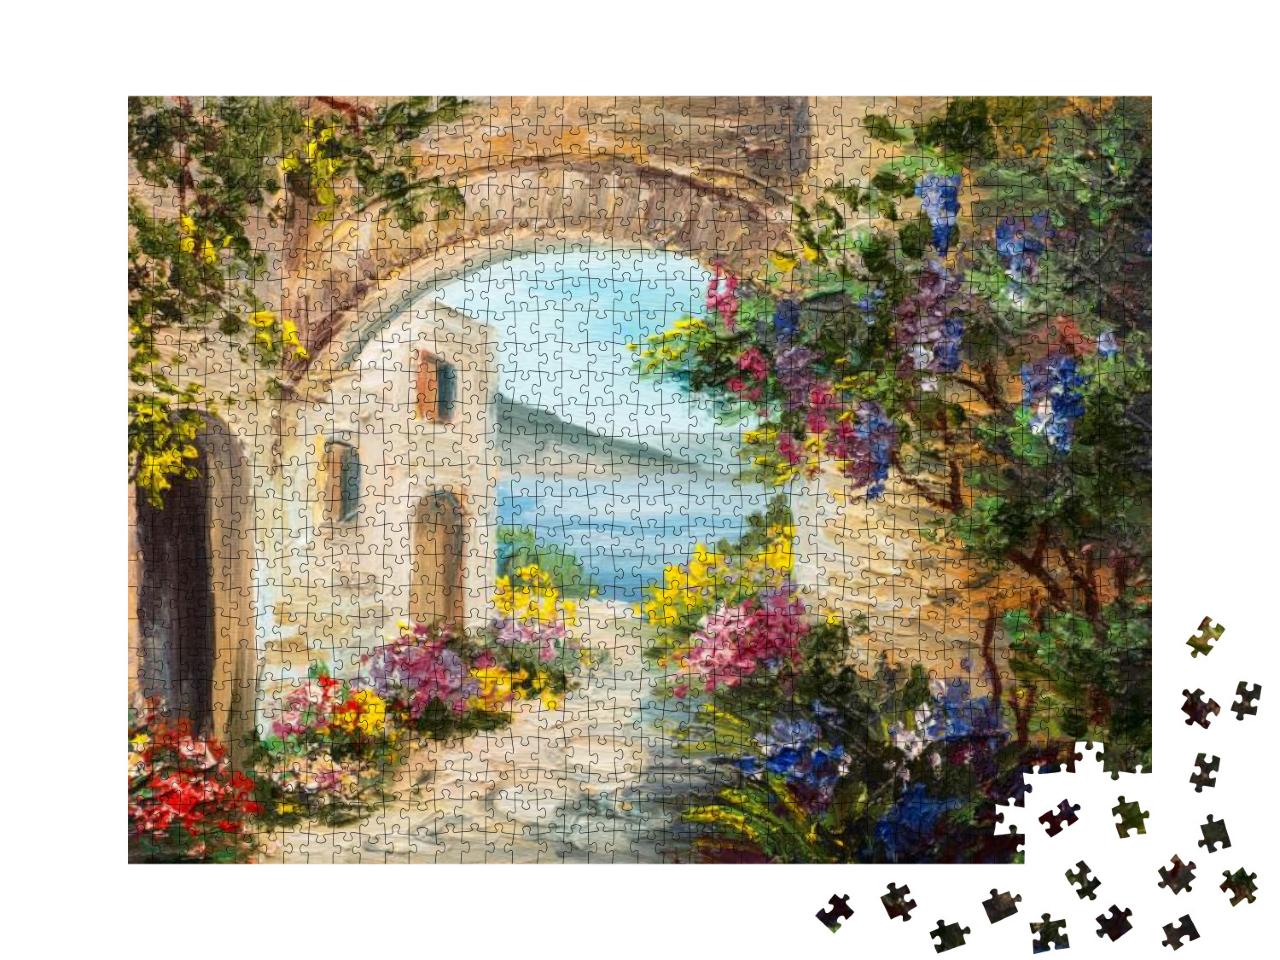 Oil Painting - House Near the Sea, Colorful Flowers, Summ... Jigsaw Puzzle with 1000 pieces